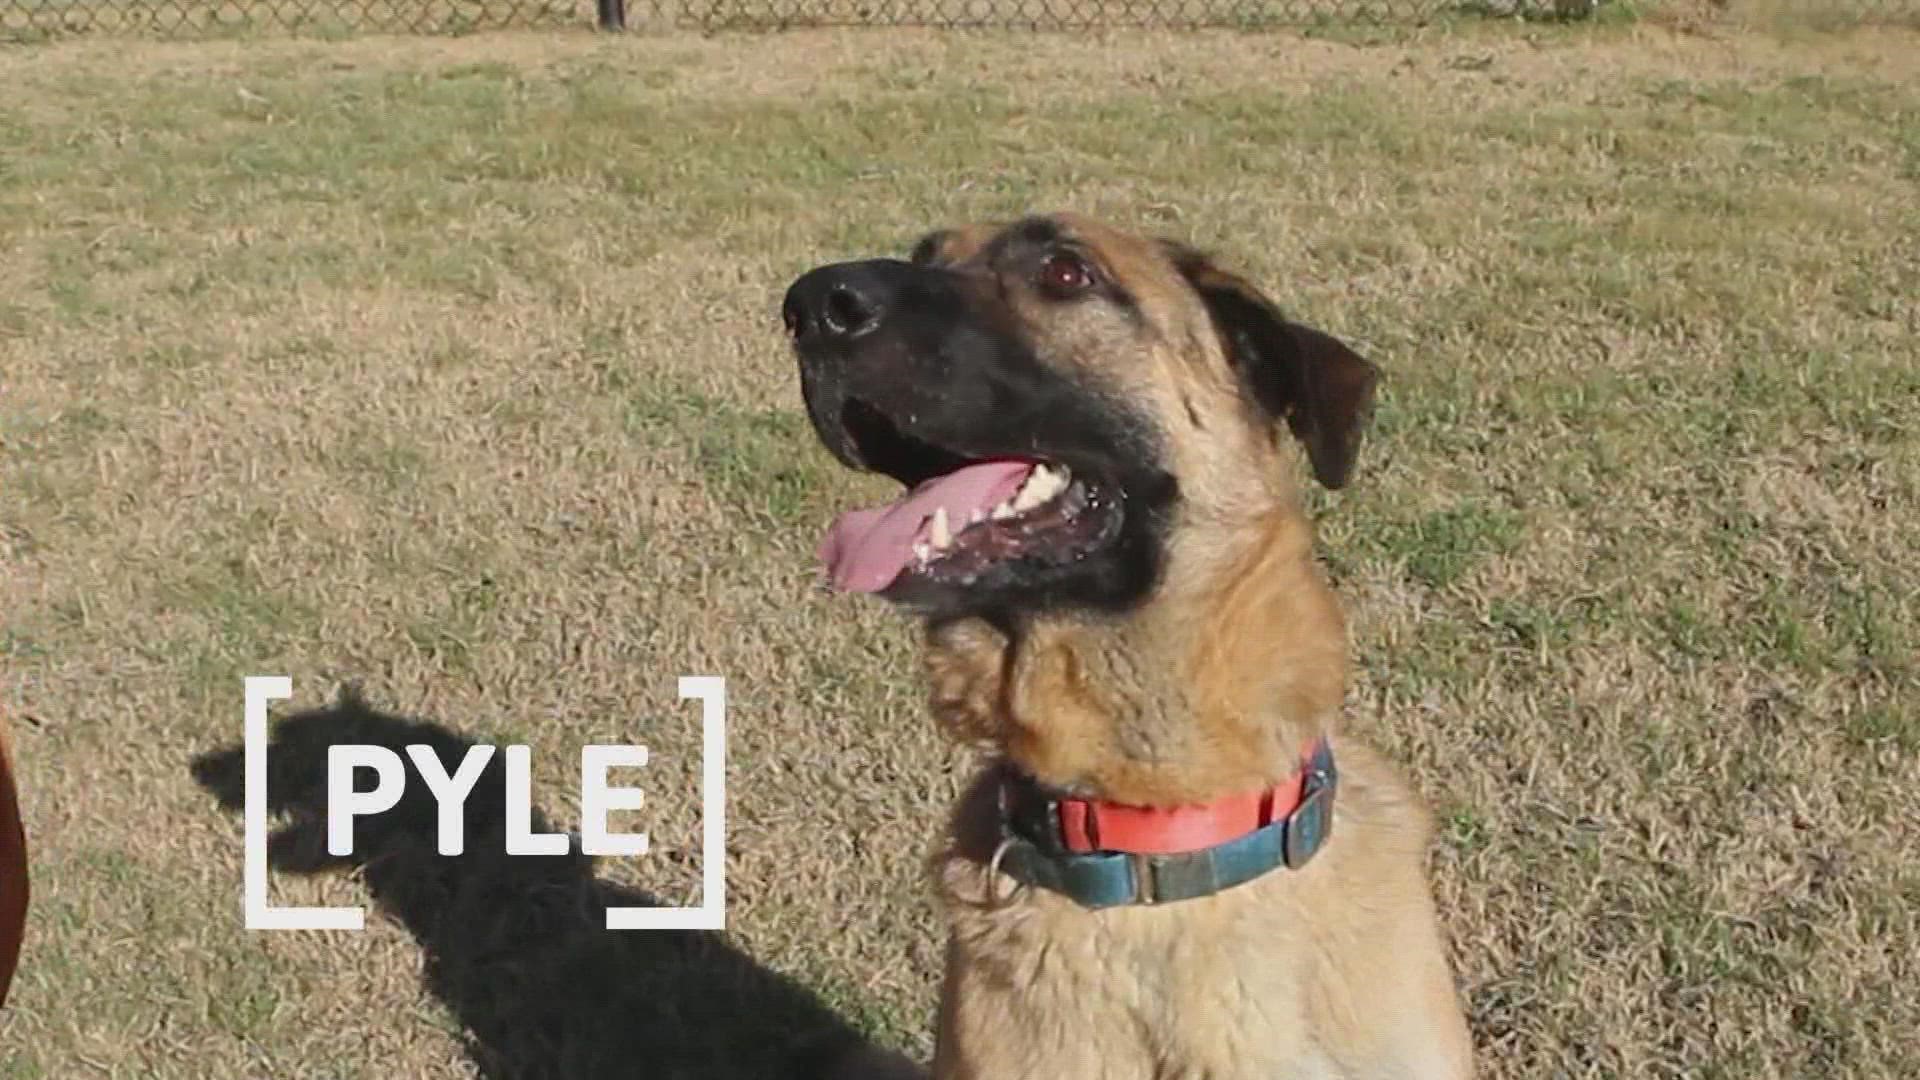 This German Shephard mix is a "pile" of fun looking for his fur-ever home.